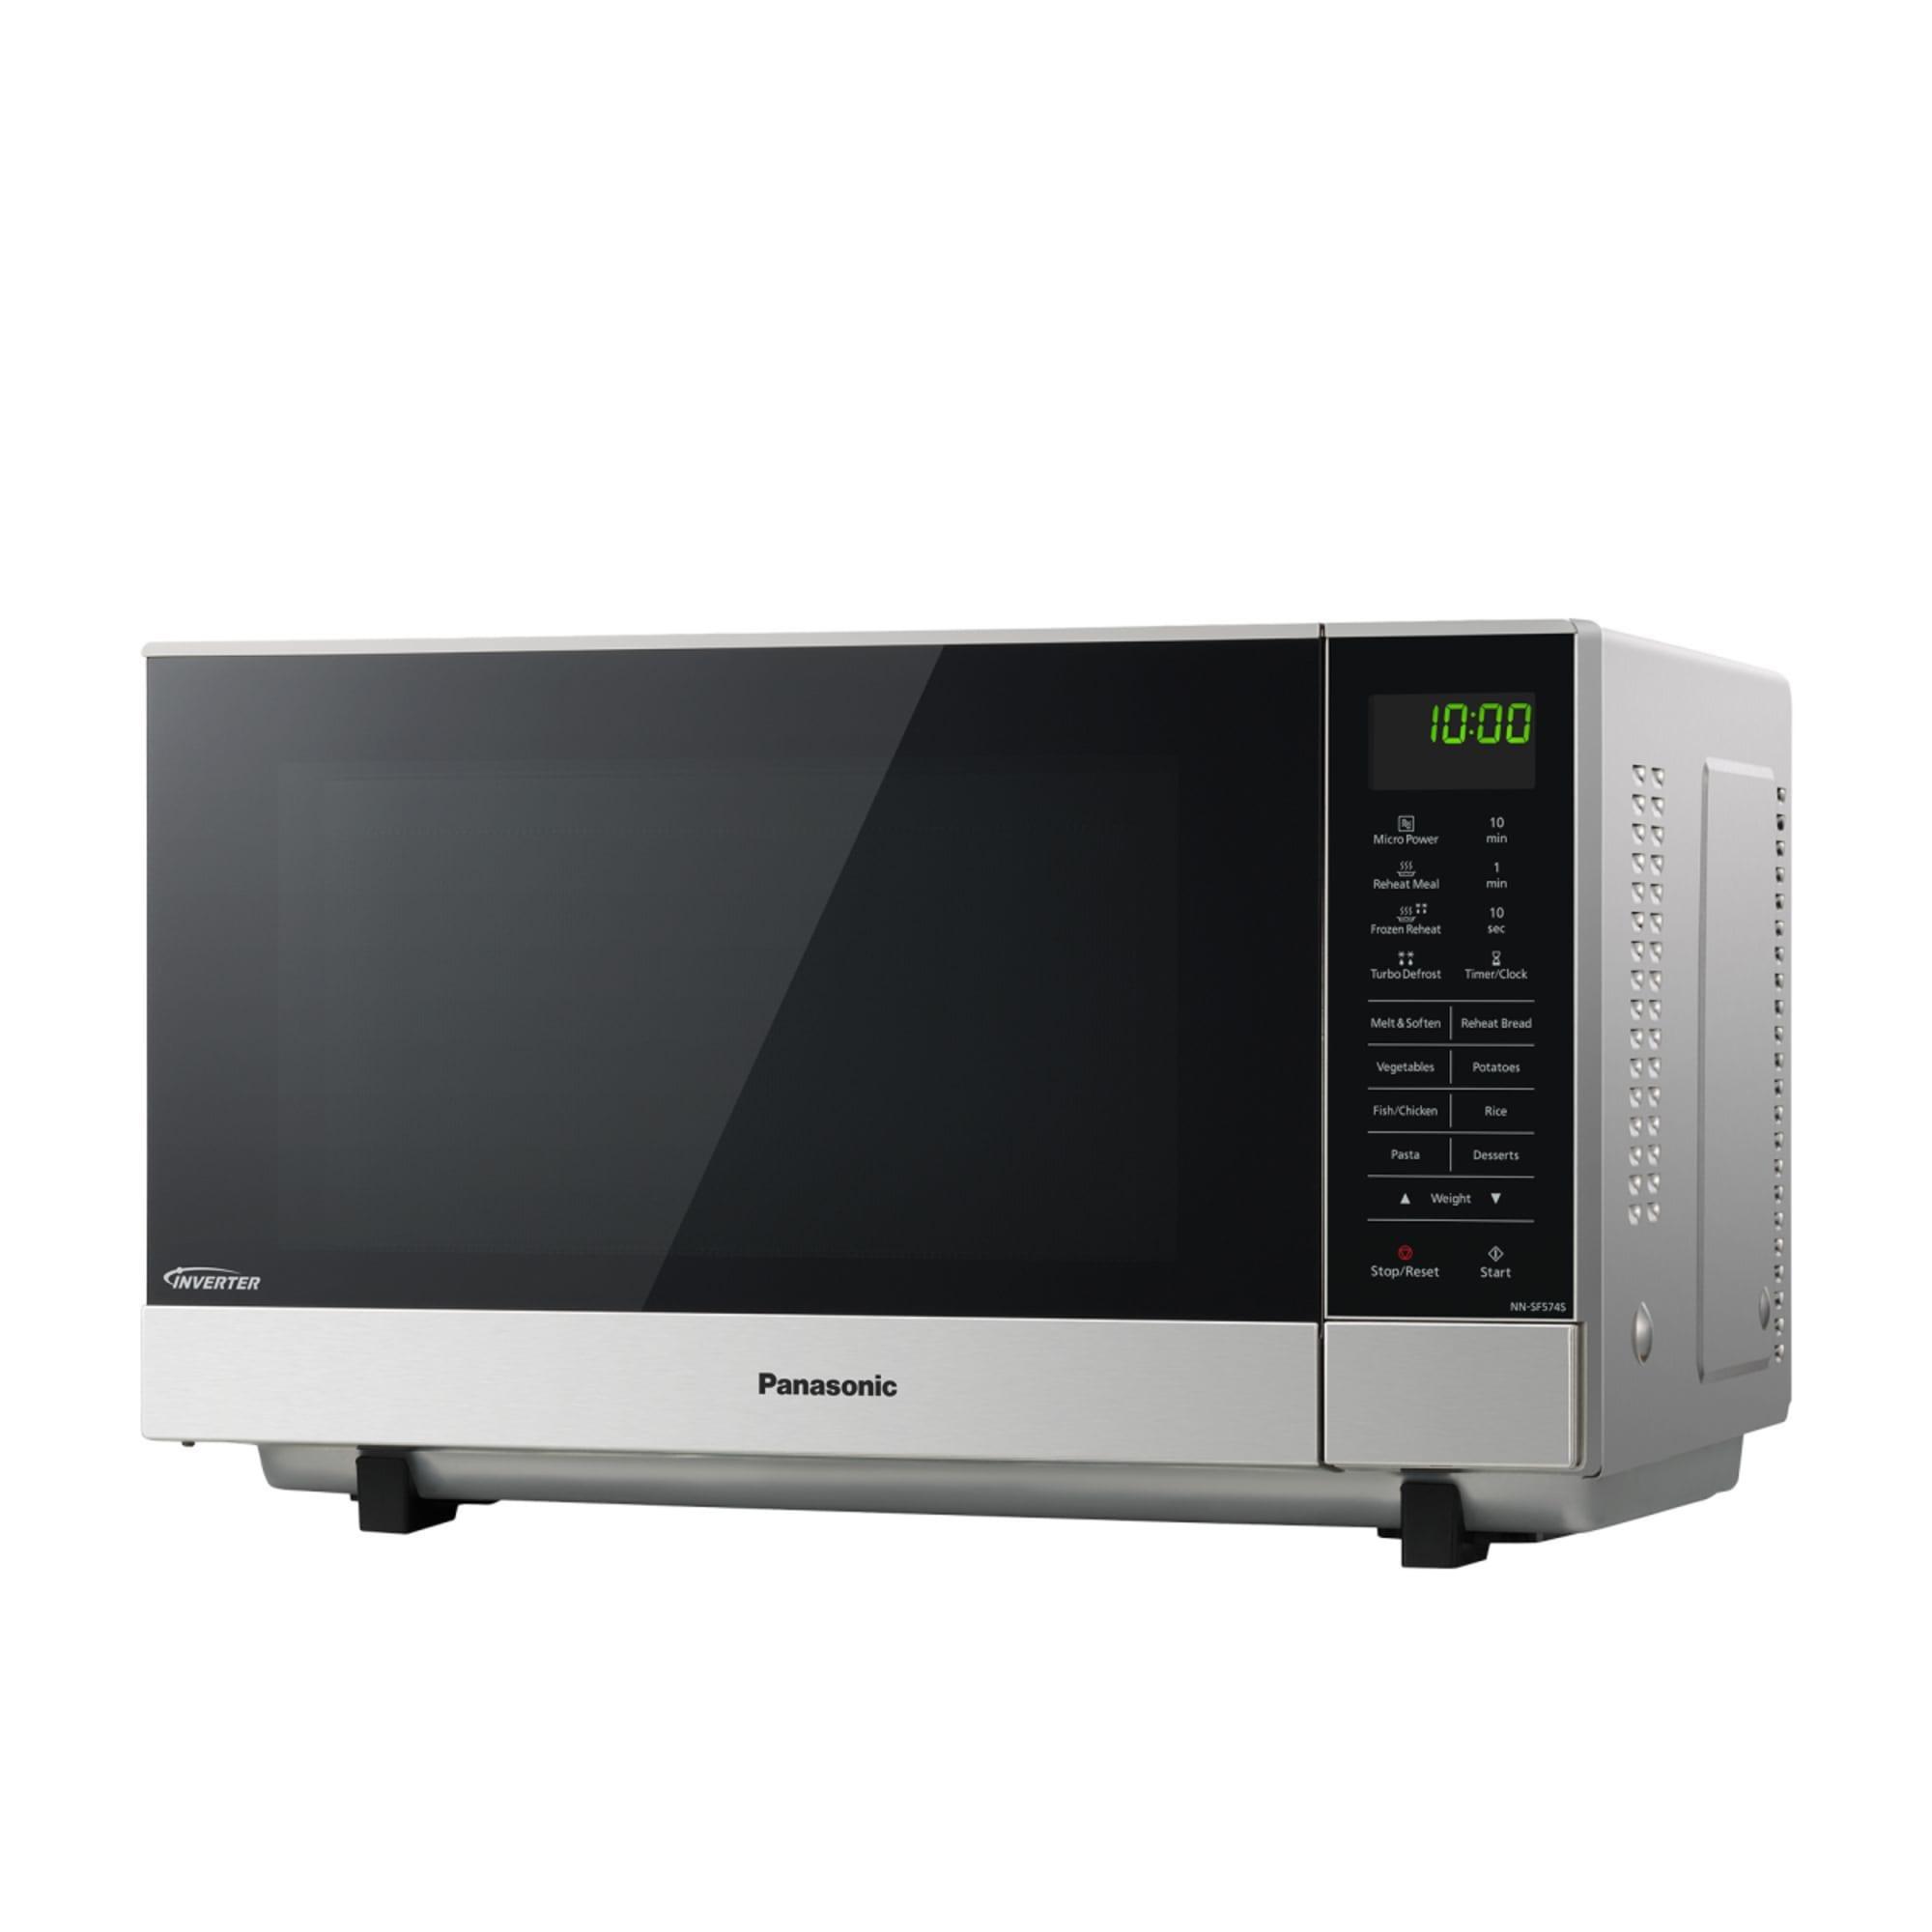 Panasonic Flatbed Microwave Oven 27L Stainless Steel Image 6